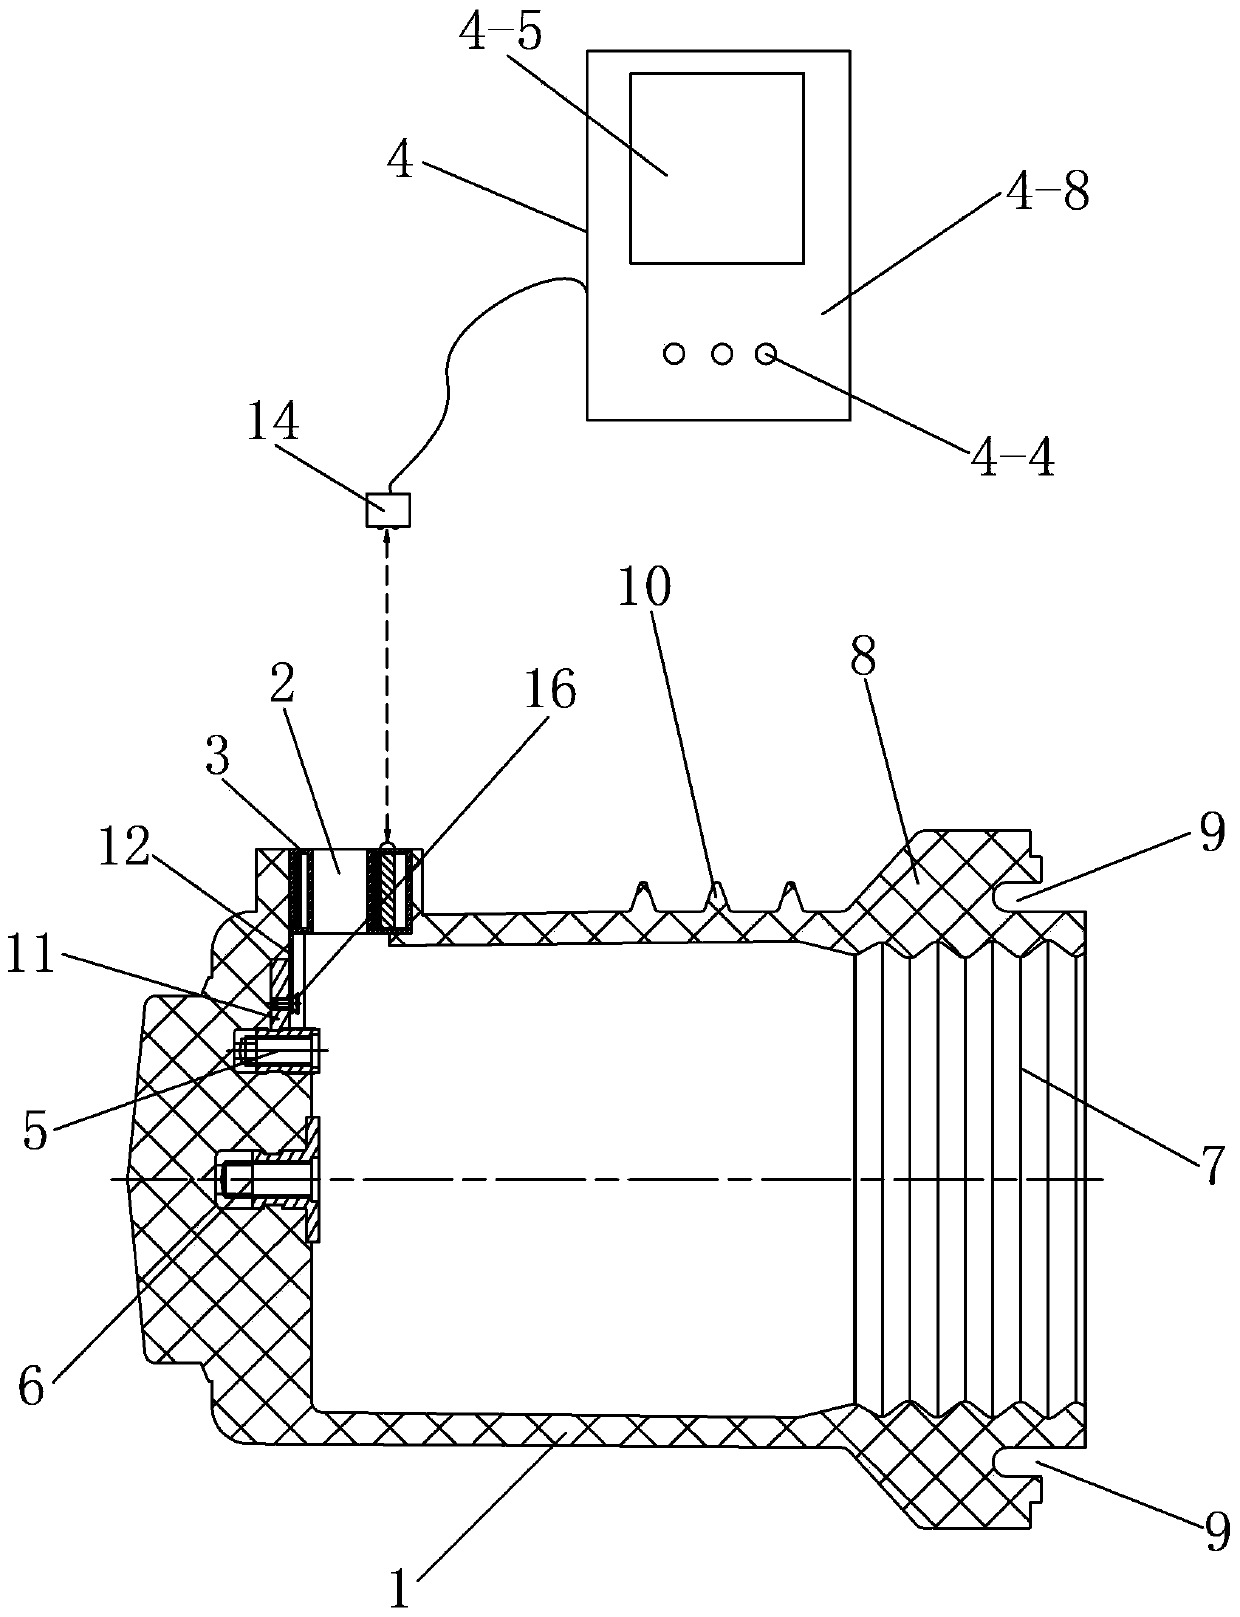 Contact box with built-in over-temperature protection device